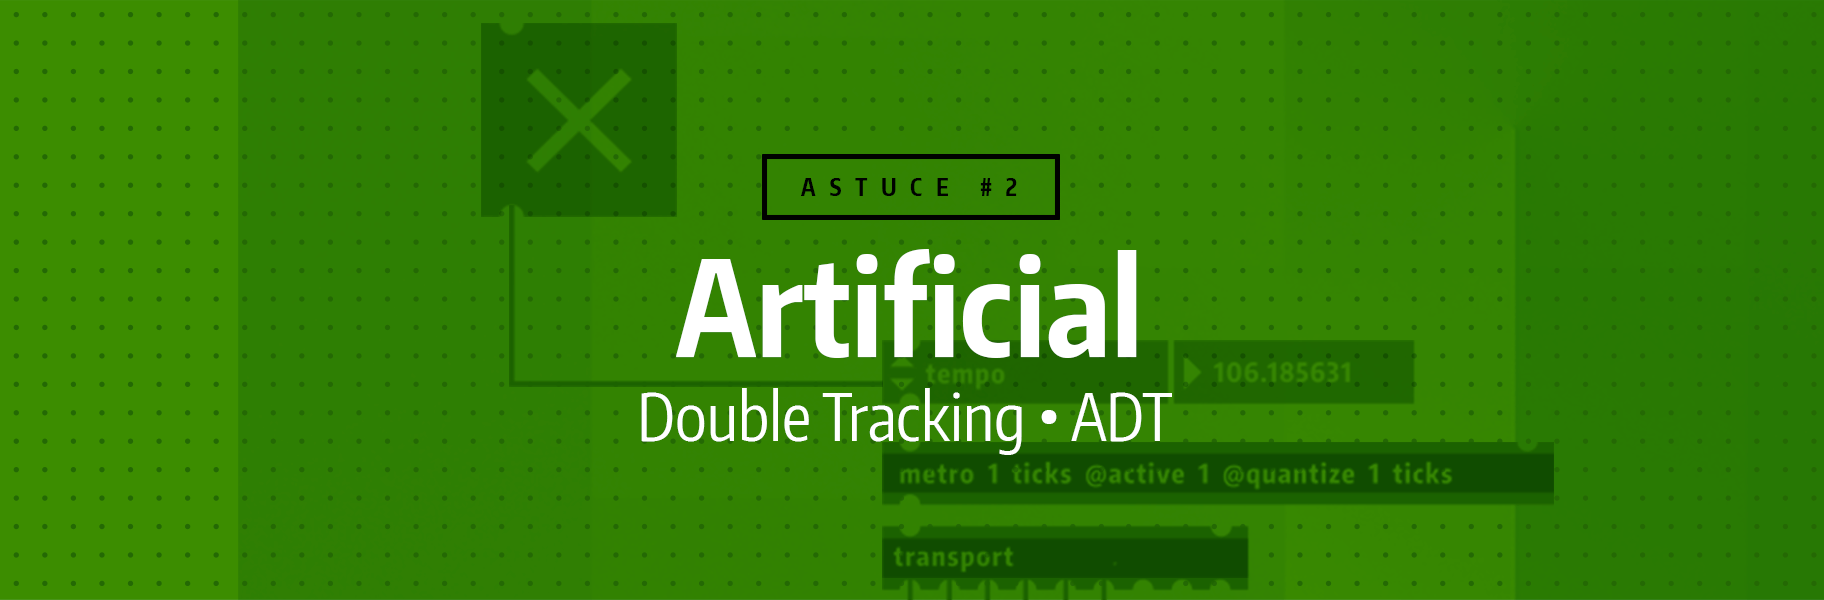 Astuce rapide #2 - Artificial Doubling Tracking